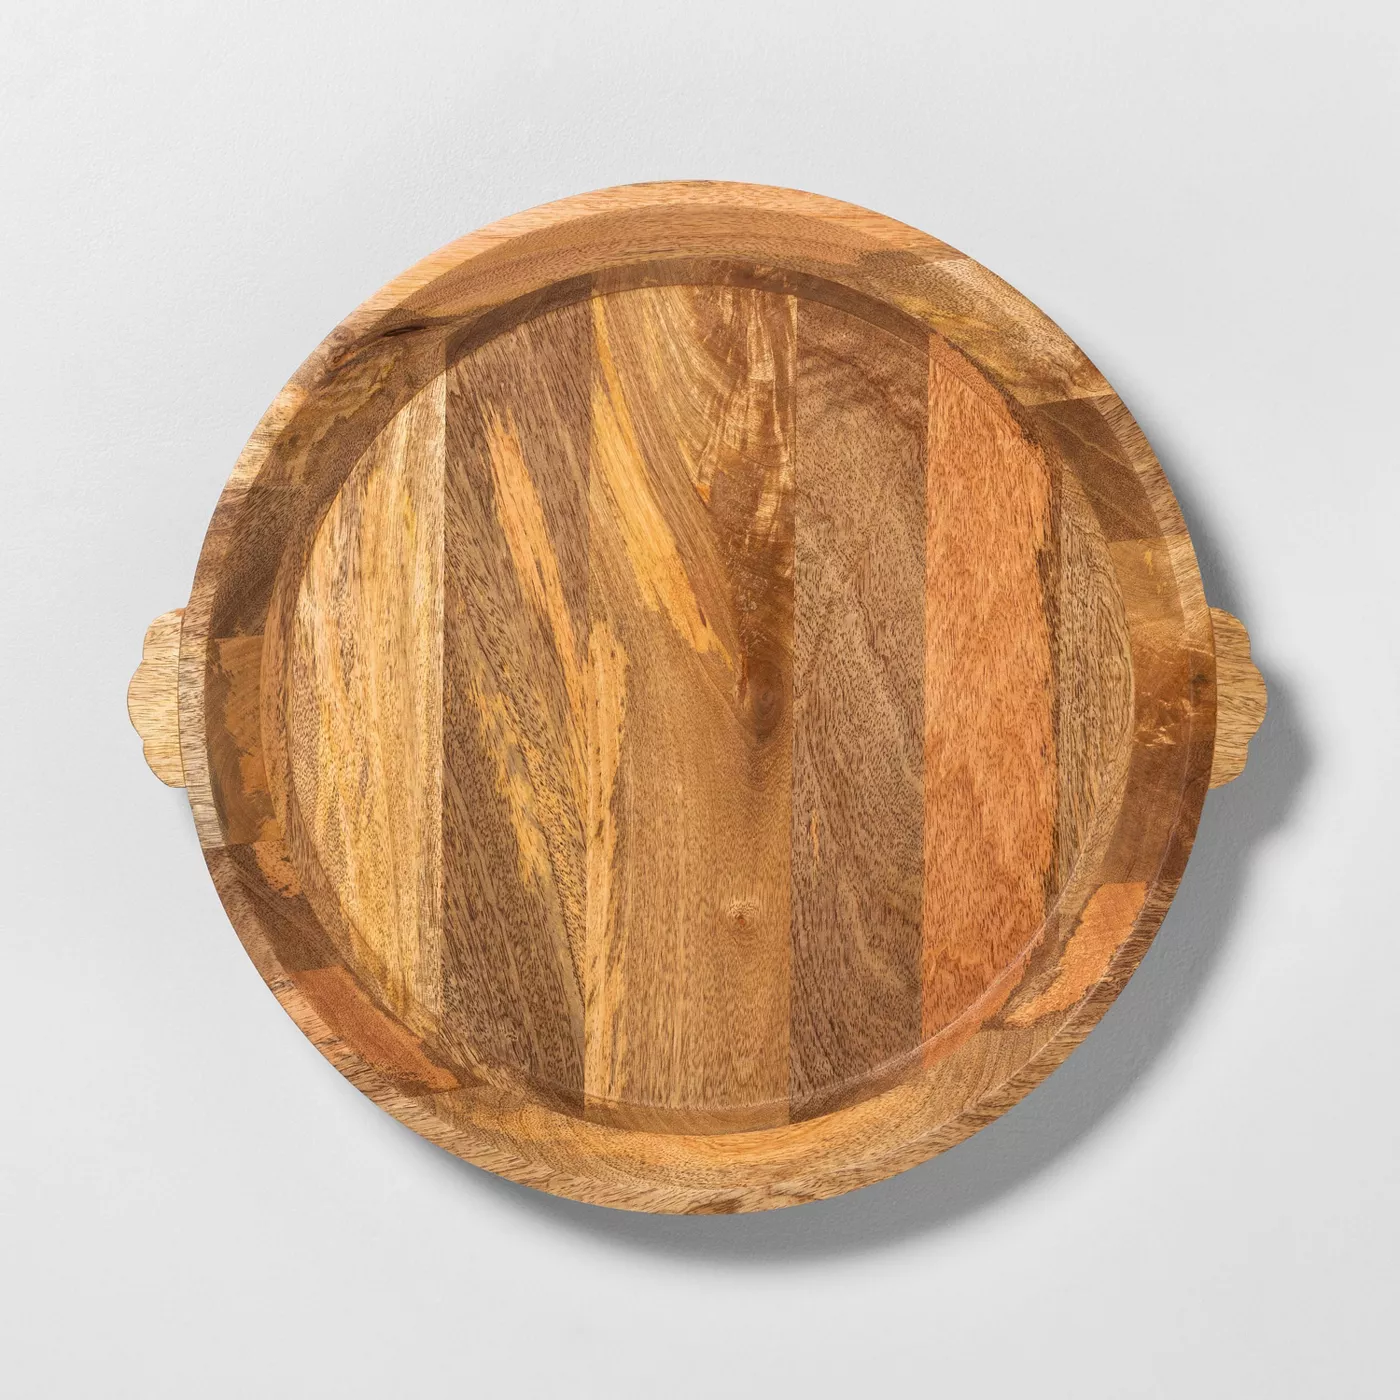 Oversized Carved Wood Tray - Hearth & Hand™ with Magnolia - image 1 of 10